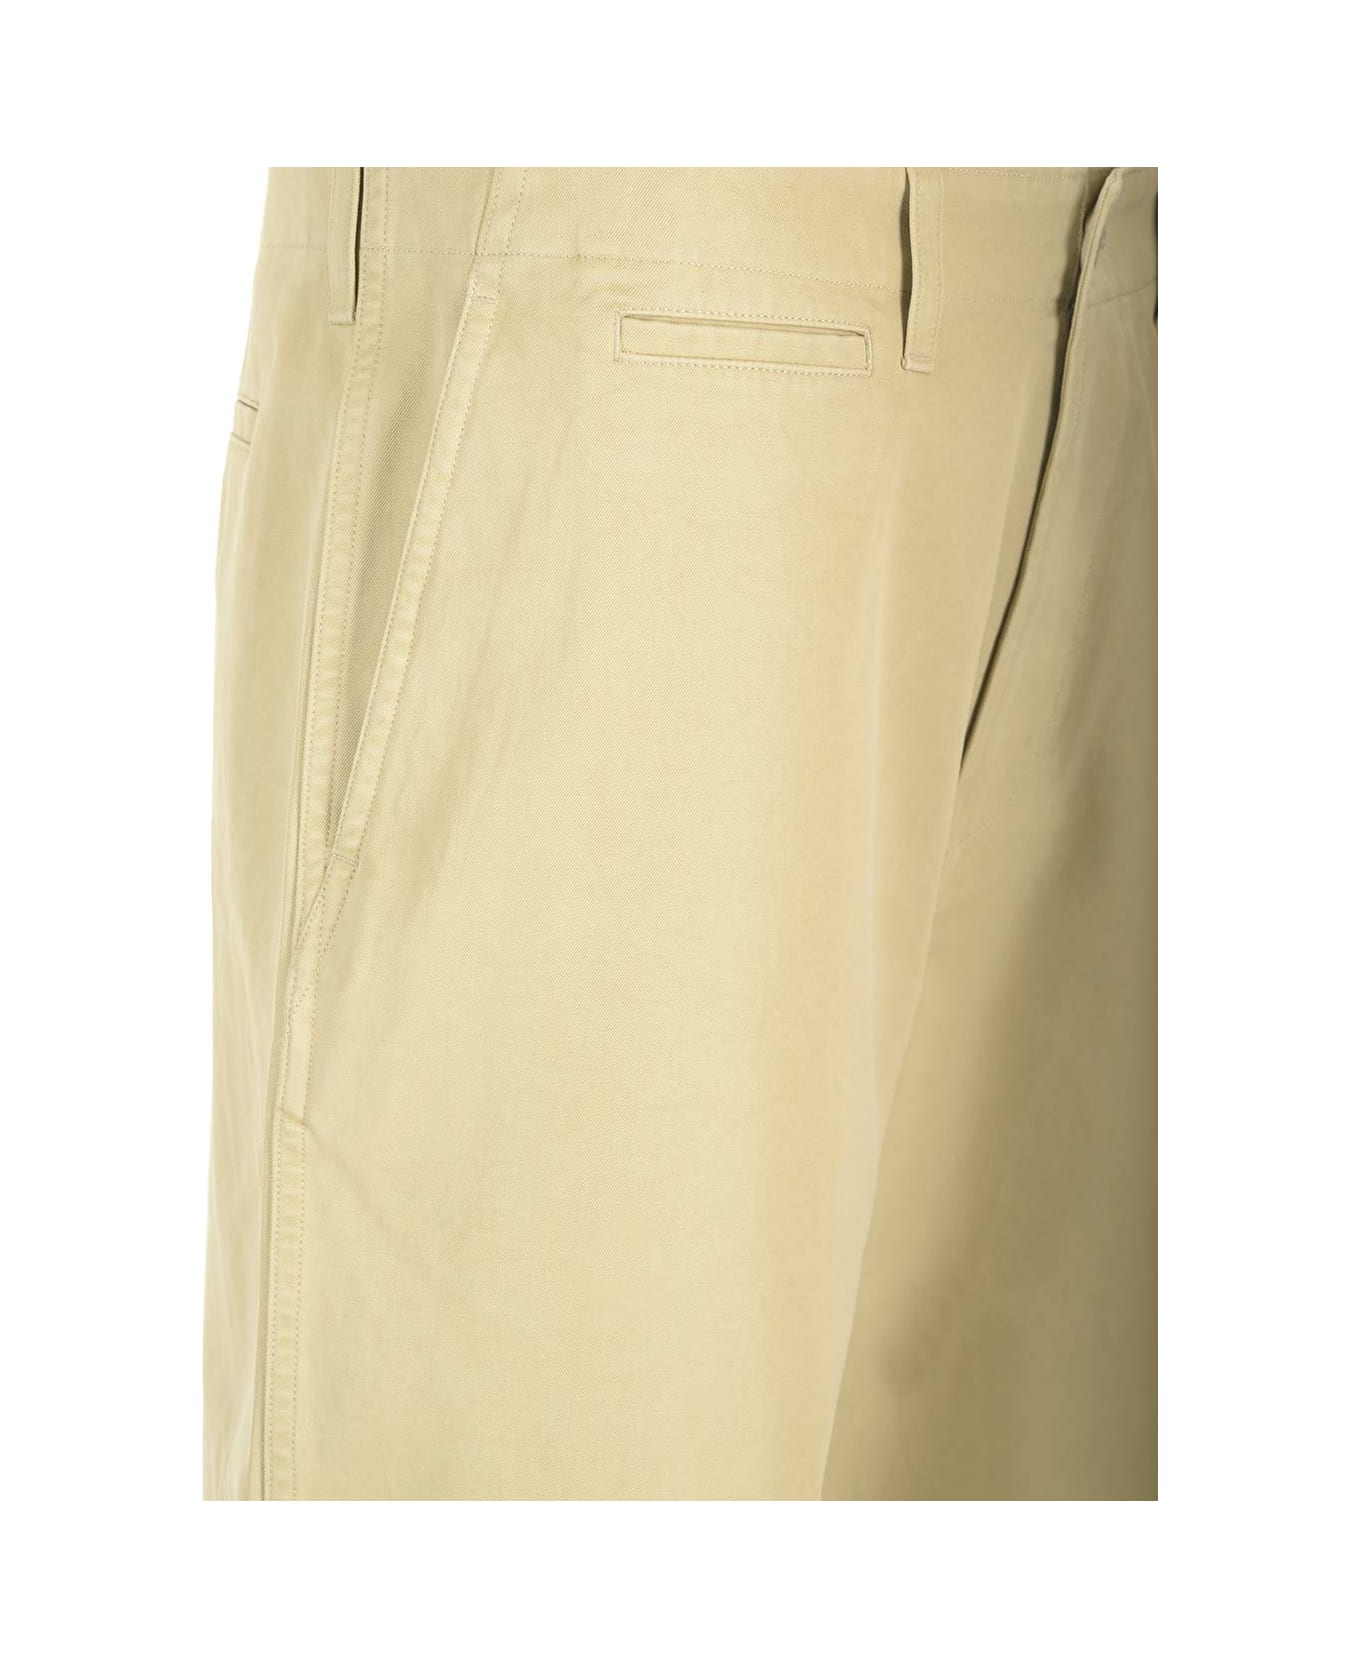 Burberry Wide Leg Chino Trousers - Green